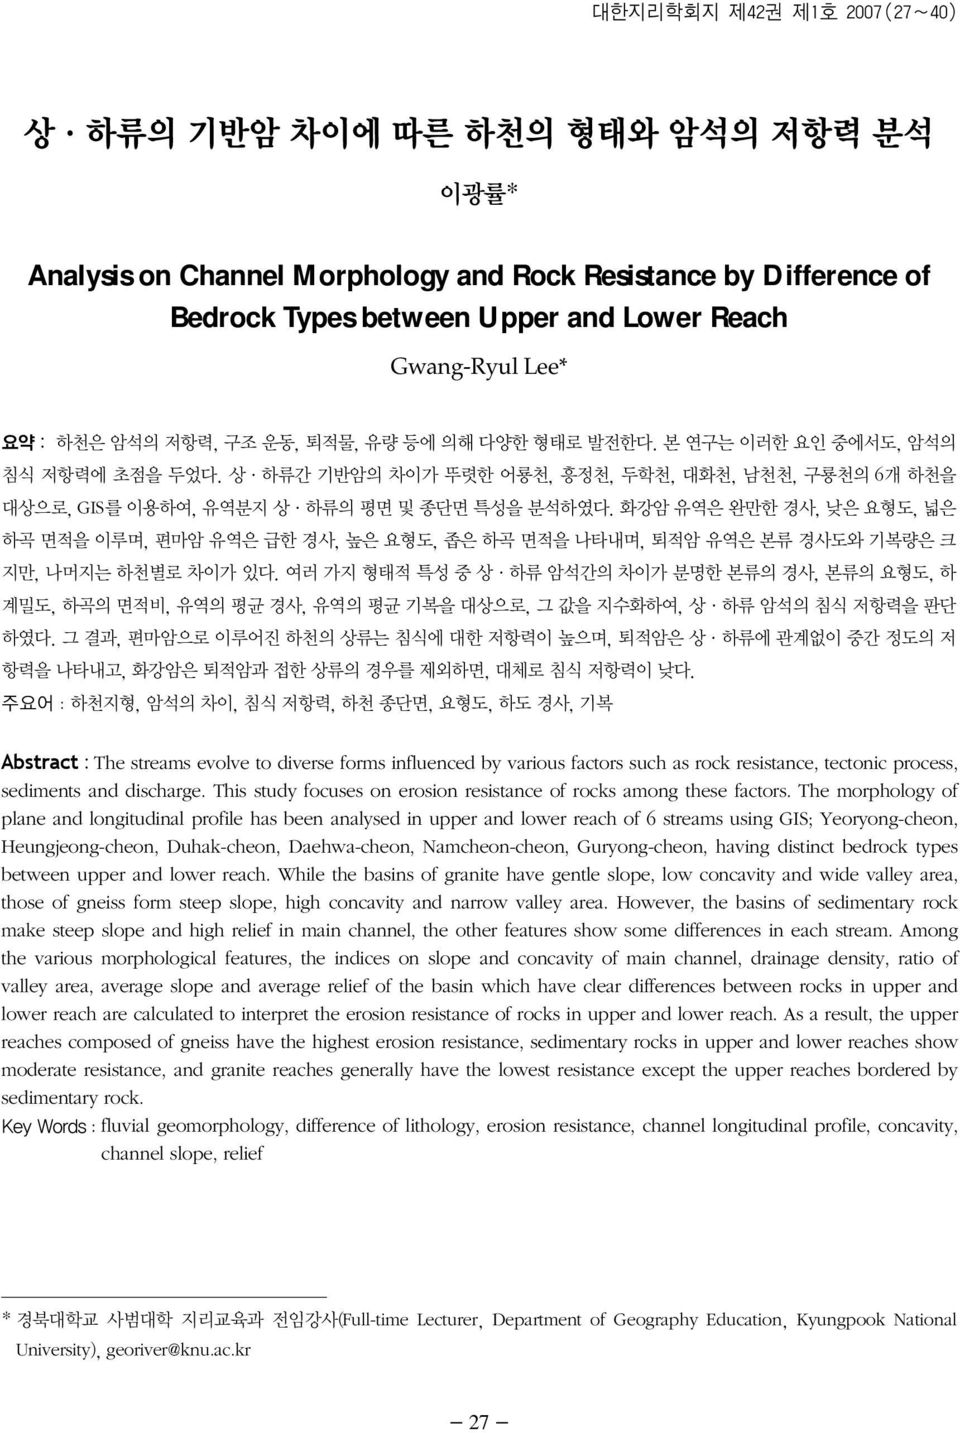 The morphology of plane and longitudinal profile has been analysed in upper and lower reach of 6 streams using GIS; Yeoryong-cheon, Heungjeong-cheon, Duhak-cheon, Daehwa-cheon, Namcheon-cheon,